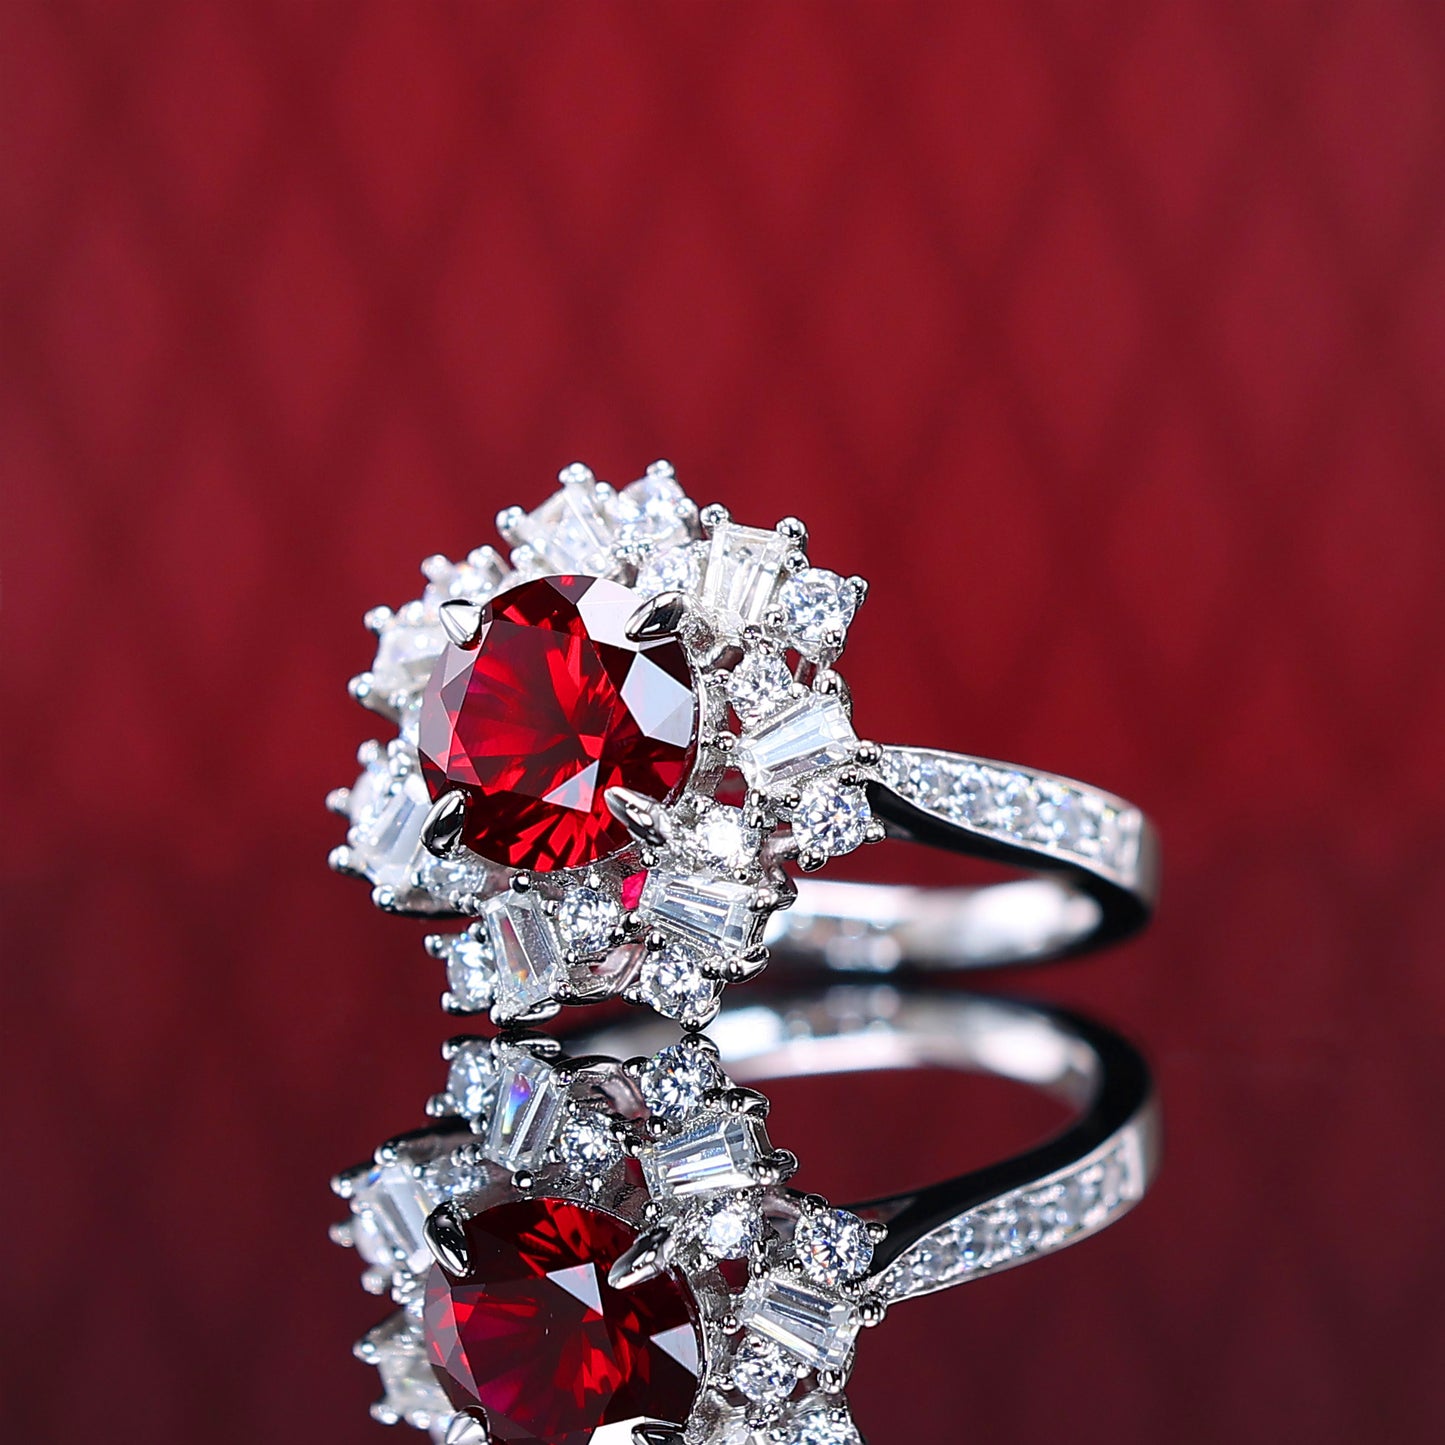 Micro-setting Ruby color irregular detailed ring, sterling silver